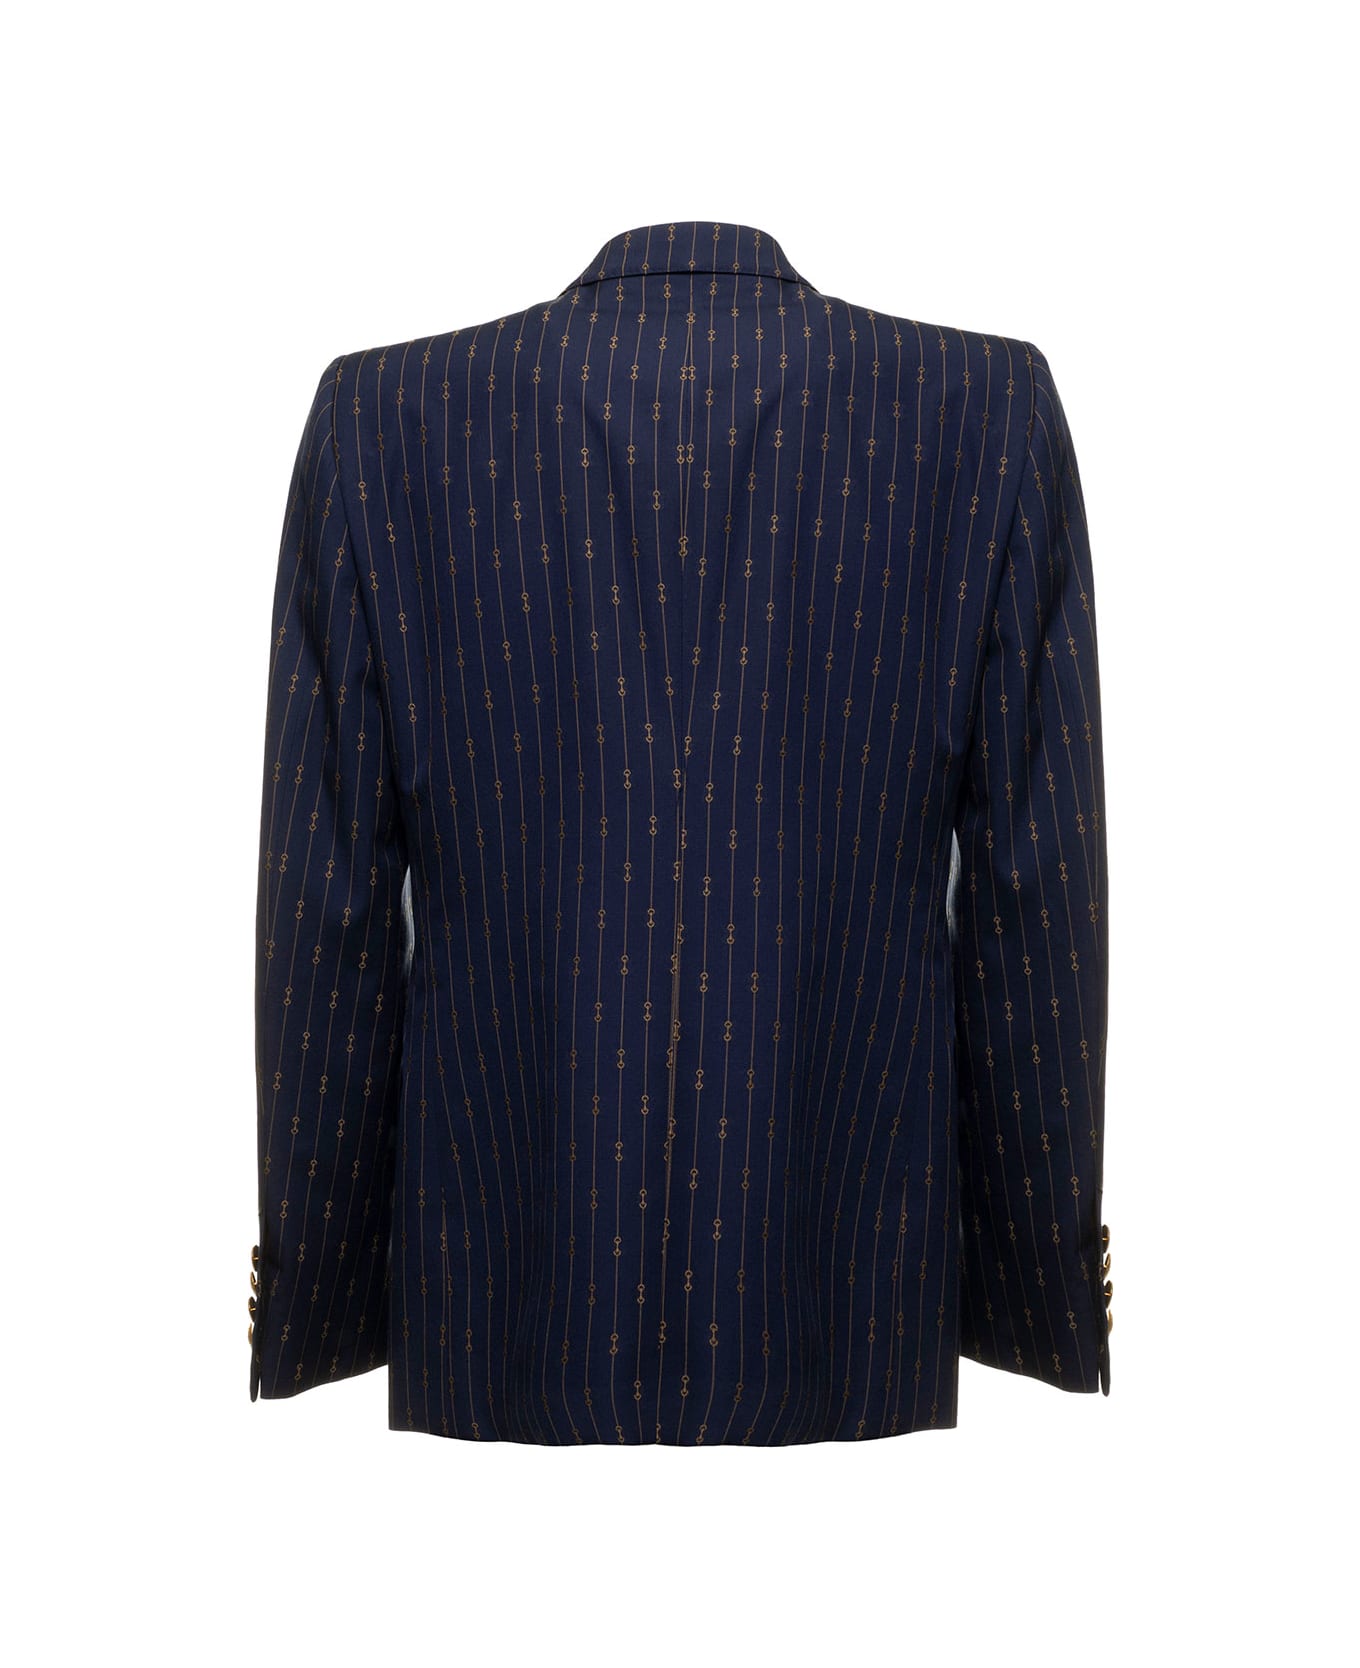 Gucci Man's Blue Printed Wool Double-breasted Blazer - Blu